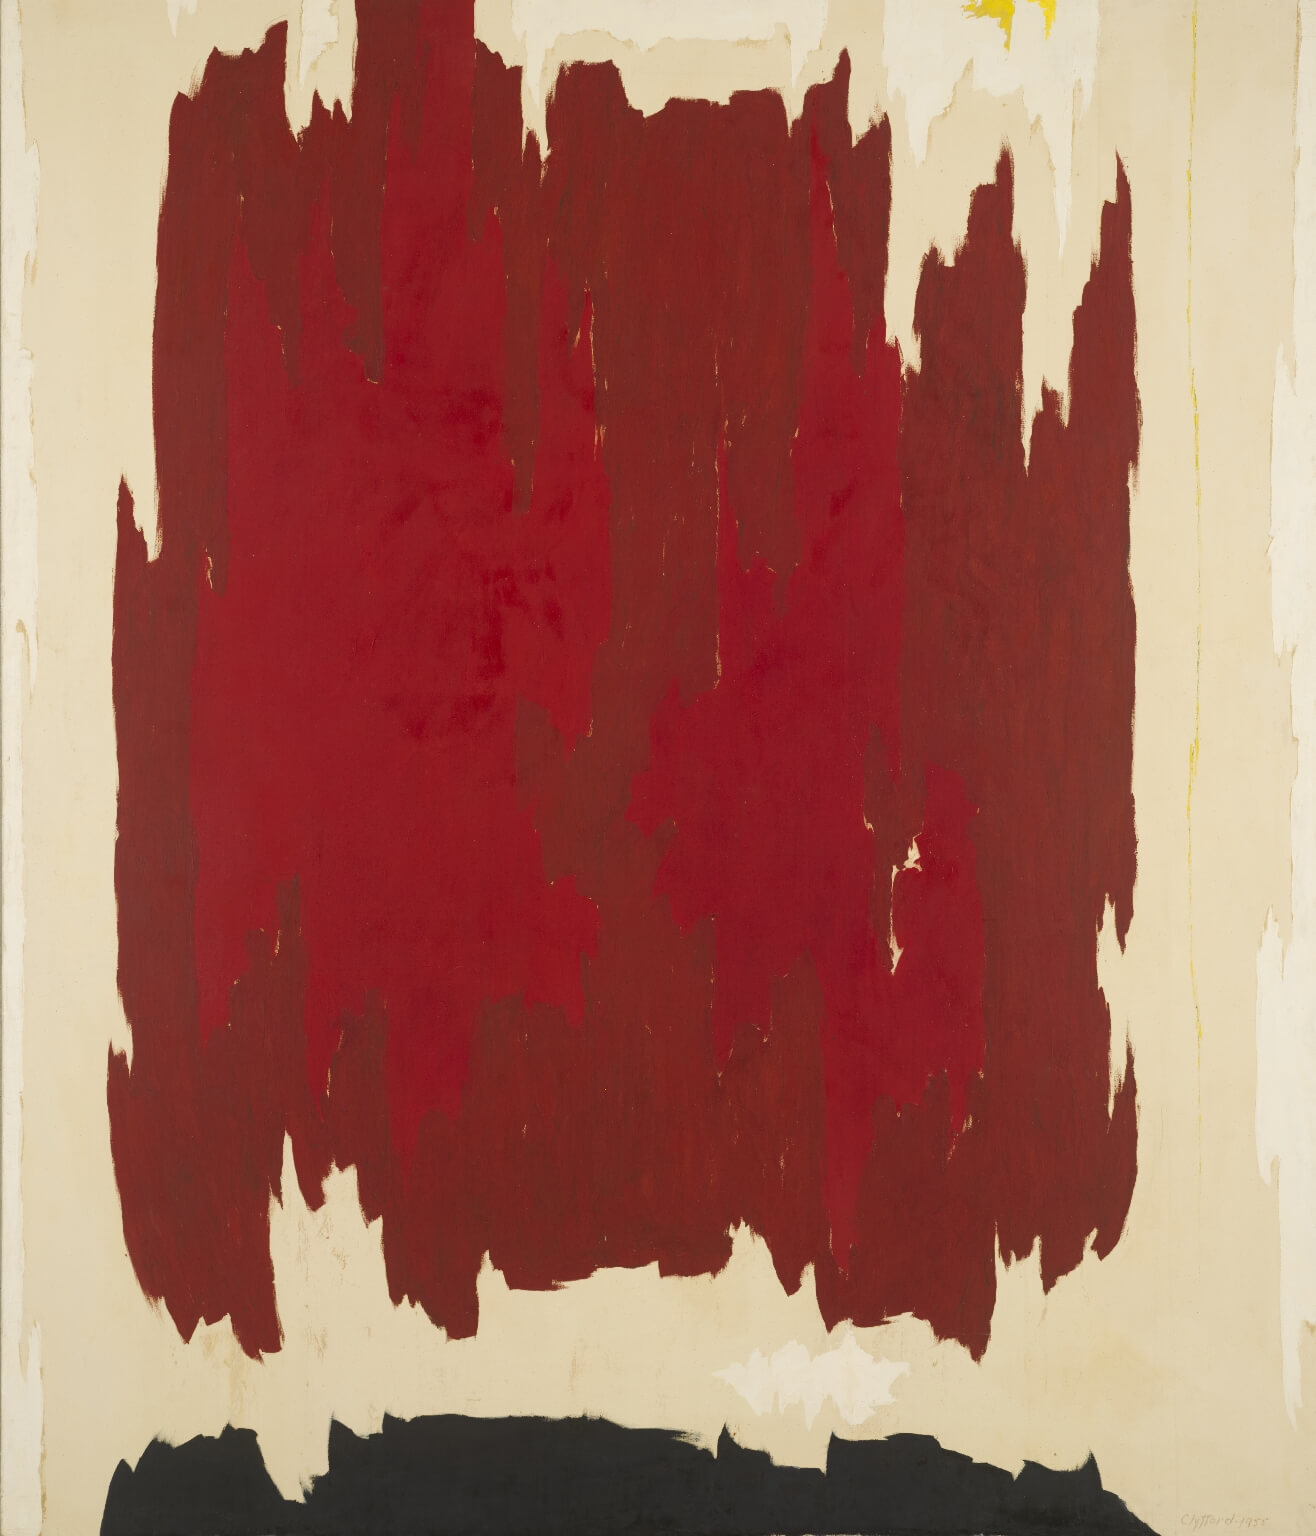 Vertical abstract painting with bare canvas visible around the edges and a large red splotch in the center with several shades of red and a horizontal black figure along the bottom